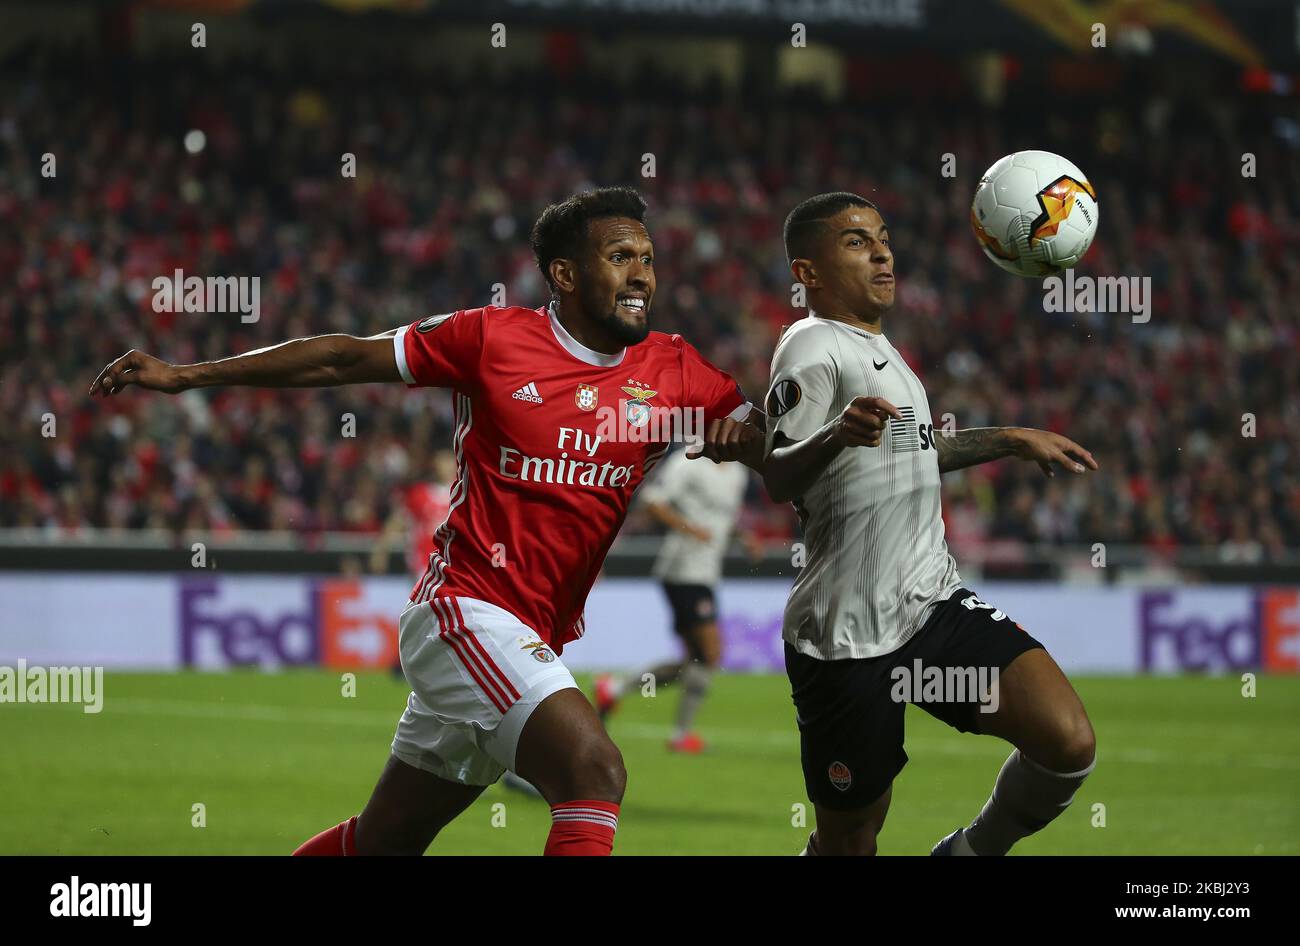 Dyego Sousa of SL Benfica(L) vies Dodo of Shakhtar Donetsk(R)1 during the UEFA Europa League Round of 32 -Second Leg match between SL Benfica and Shakhtar Donetsk at Estadio da Luz on February 27, 2020 in Lisbon, Portugal. (Photo by Paulo Nascimento/NurPhoto) Stock Photo